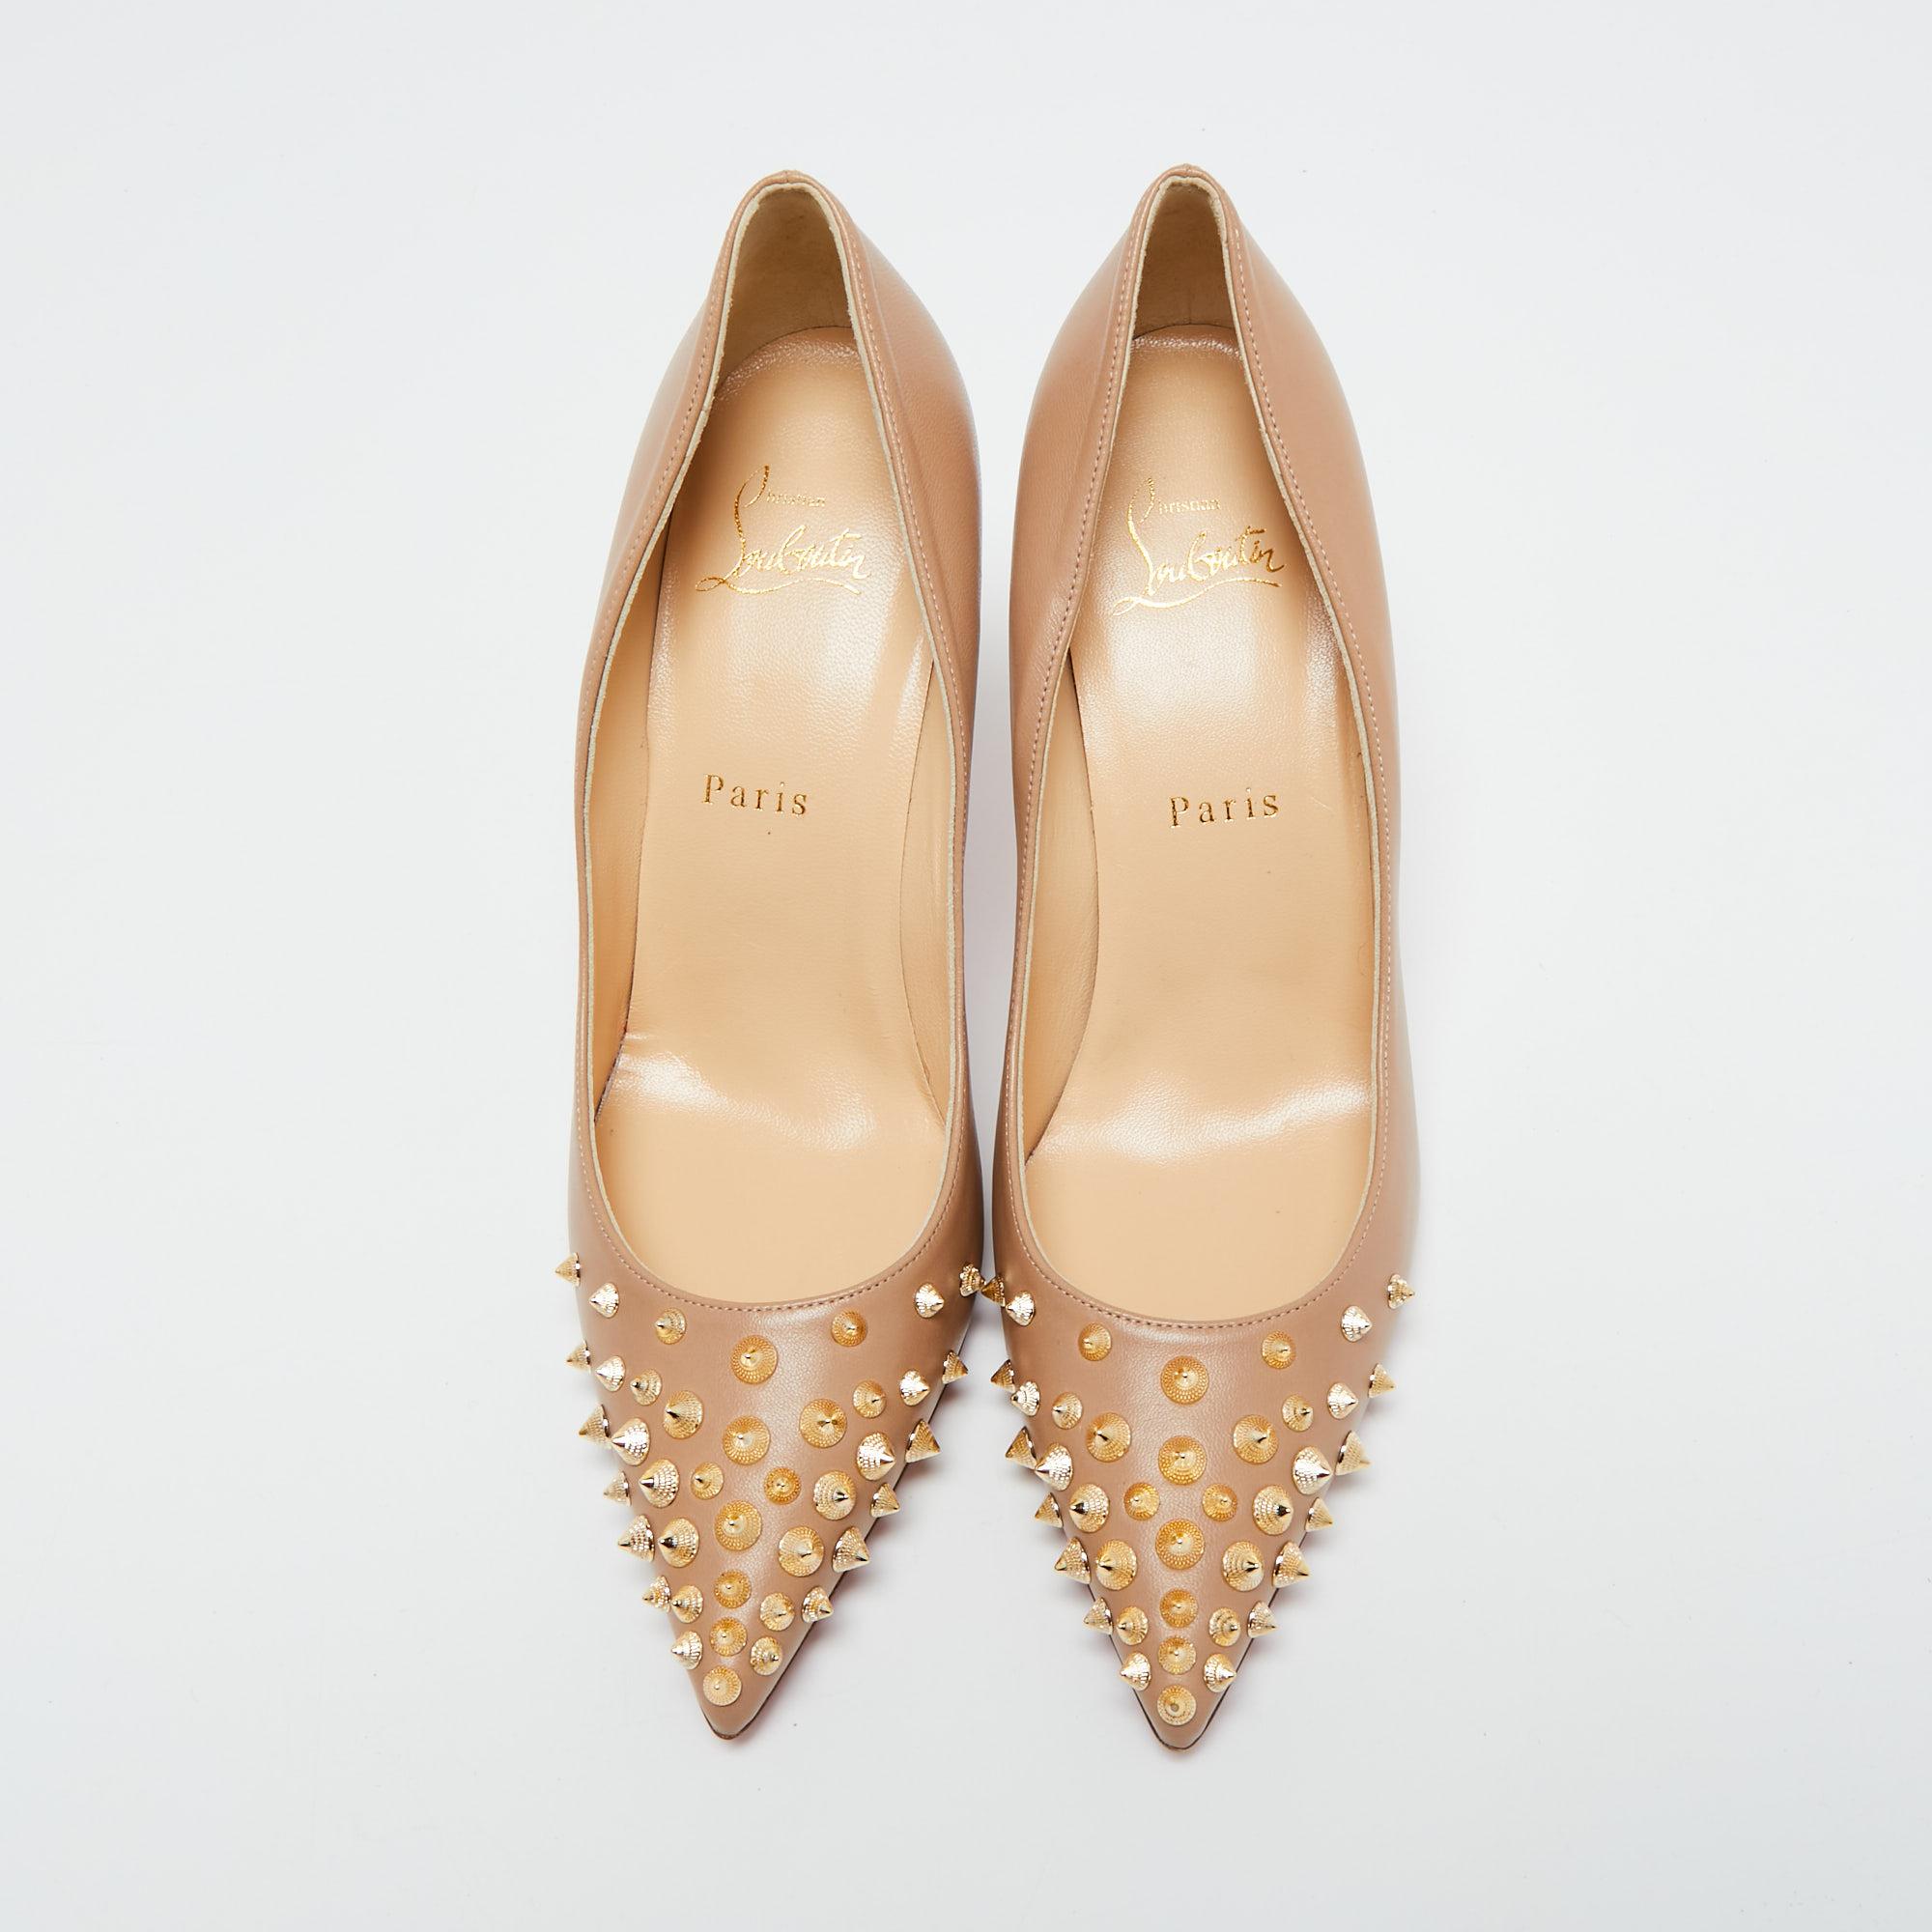 These Christian Louboutin pumps are a great choice if you’re looking to add a pair that's both classy and statement-making. The pair has been made in Italy from beige leather and set on 9 cm heels.

Includes: Branded Box

